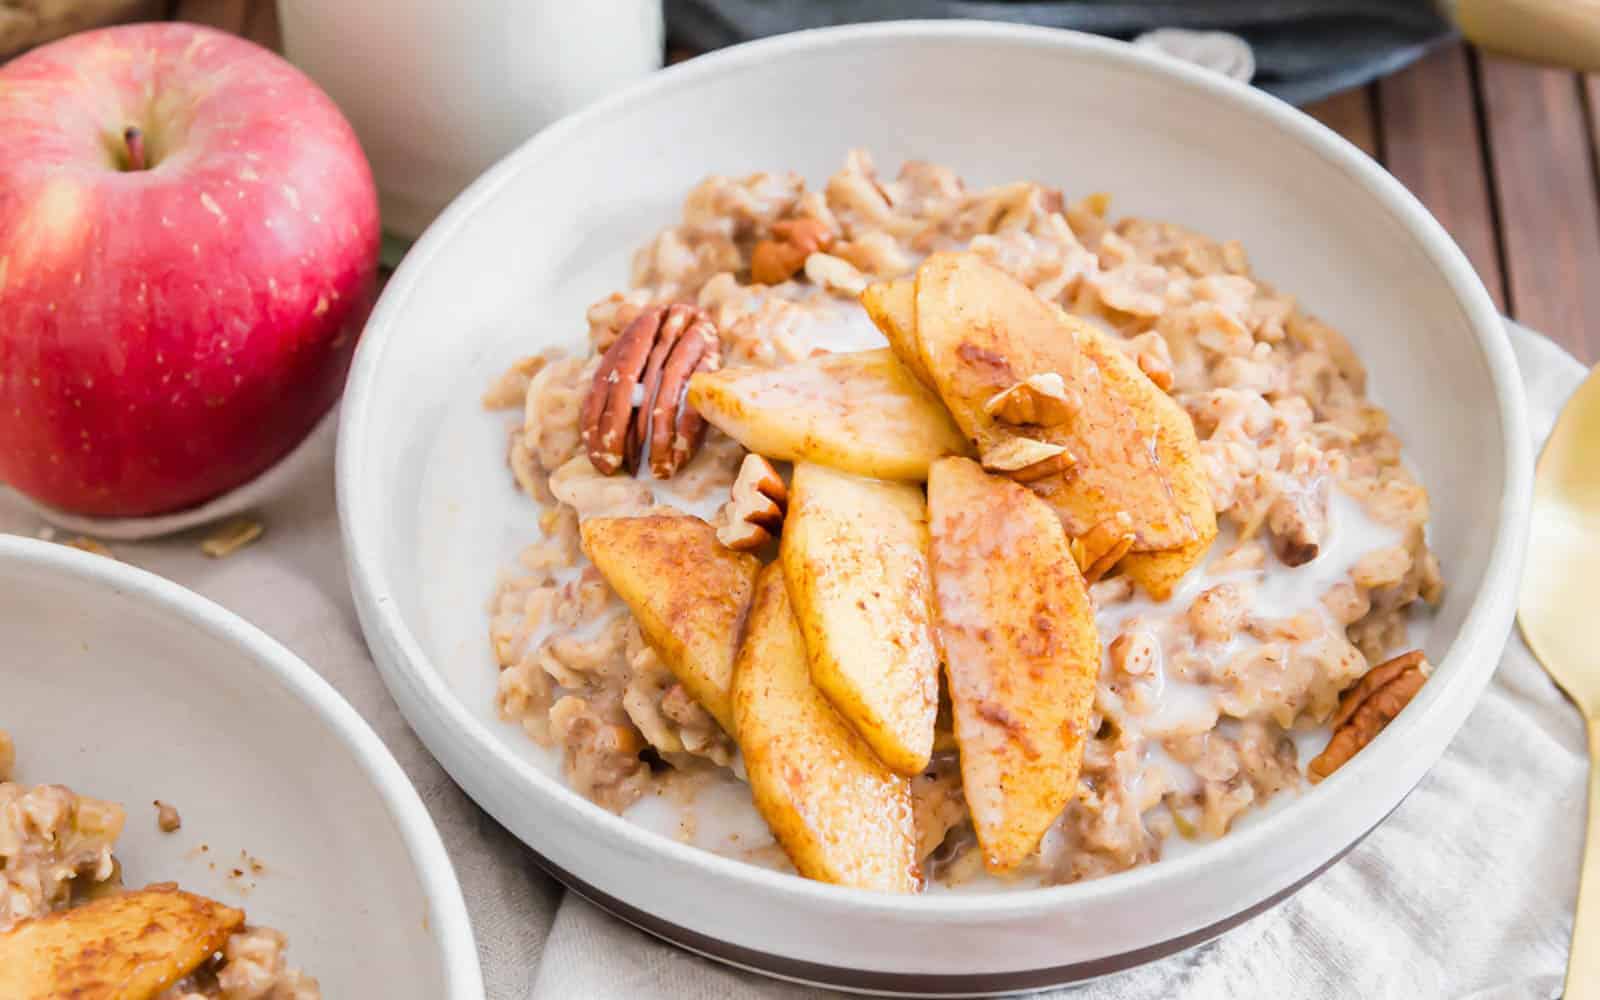 <p>Start your cold day with apple cinnamon oatmeal, a warm, comforting dish. The combination of cooked apples, cinnamon, nutmeg, and ginger creates a cozy, spiced flavor. Topped with sweet additions, it’s a heartwarming meal for frosty mornings.<br><strong>Get the Recipe: </strong><a href="https://www.runningtothekitchen.com/apple-cinnamon-oatmeal/?utm_source=msn&utm_medium=page&utm_campaign=msn">Apple Cinnamon Oatmeal</a></p>